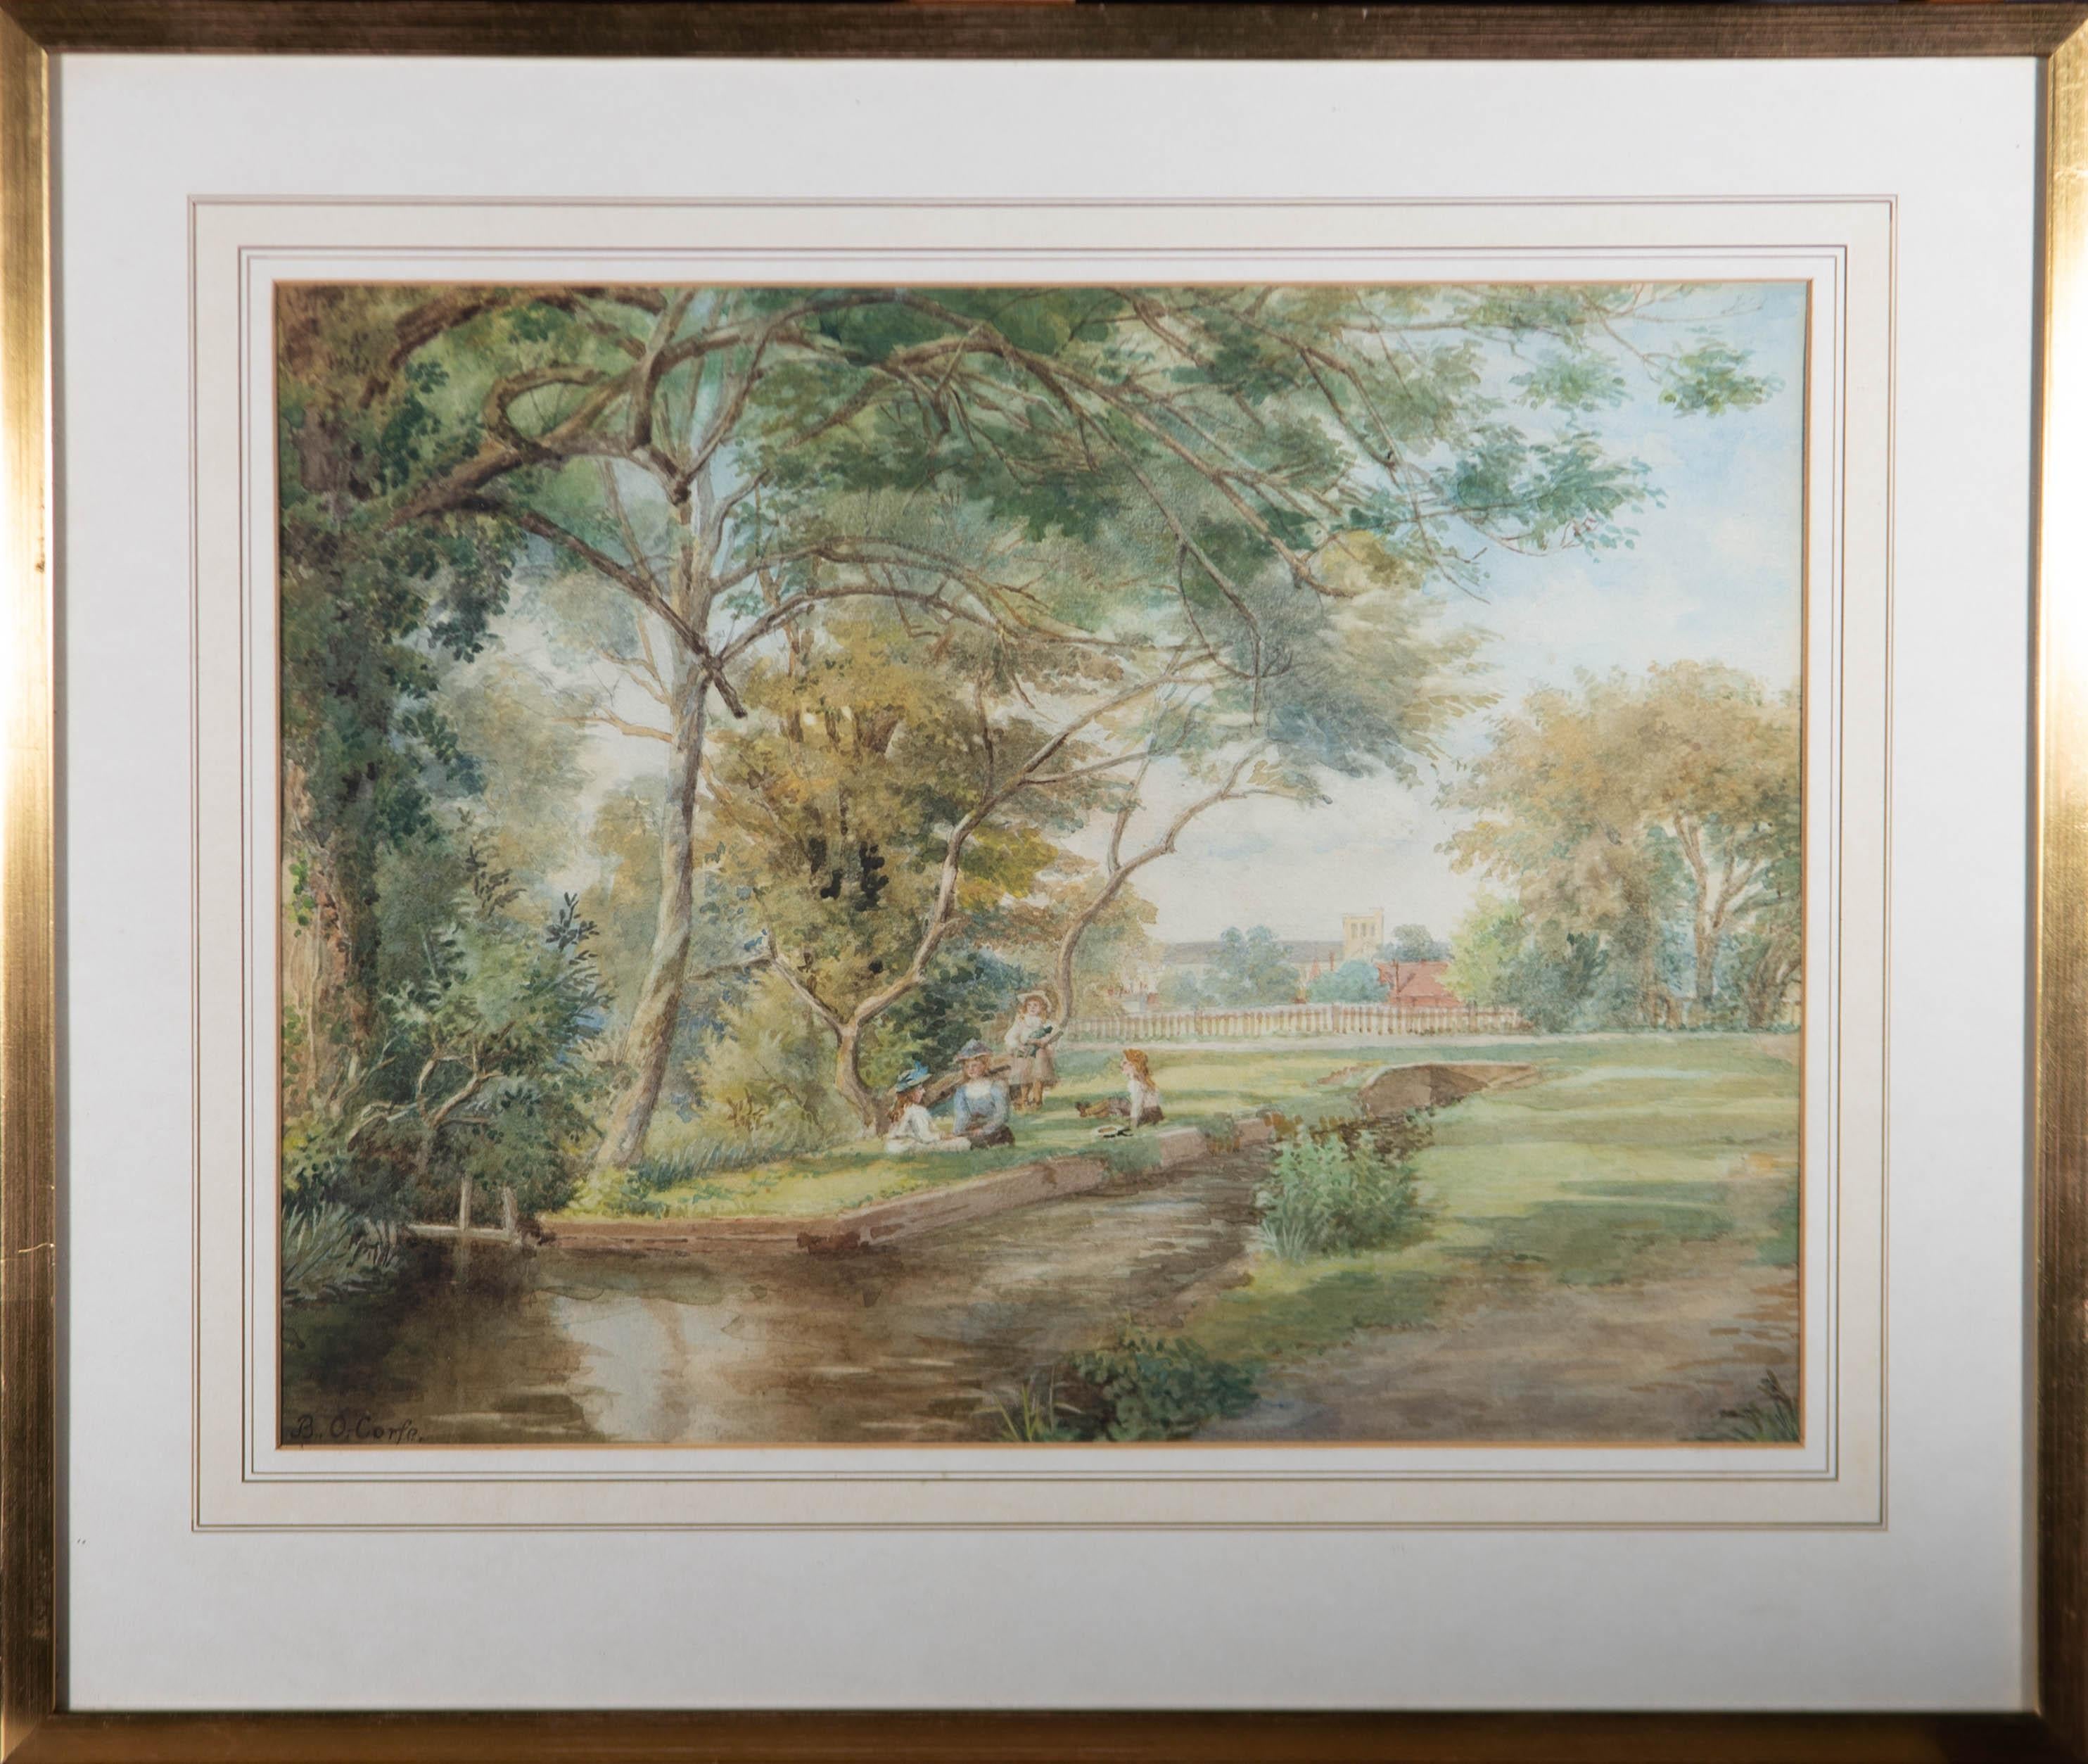 Unknown Landscape Art - B. O. Corfe - Early 20th Century Watercolour, Resting In The Shade